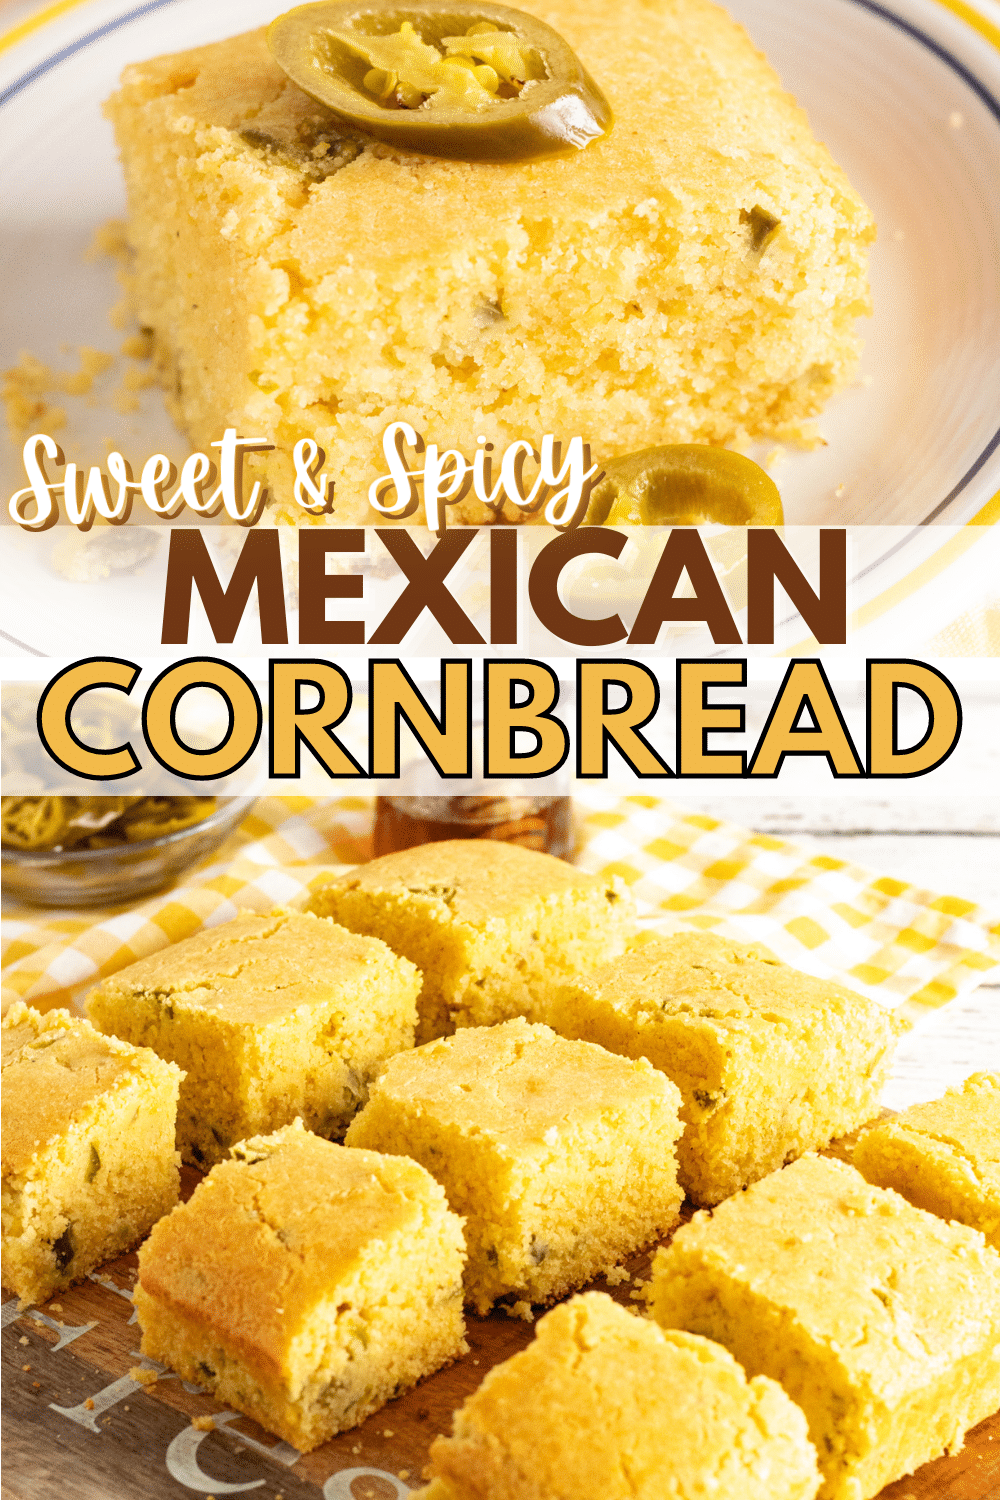 This Honey Jalapeno Mexican Cornbread Recipe is a fast and simple recipe that you can easily make at home! Delicious homemade cornbread. #mexicancornbread #cornbread #honey #jalapeno #recipe via @wondermomwannab